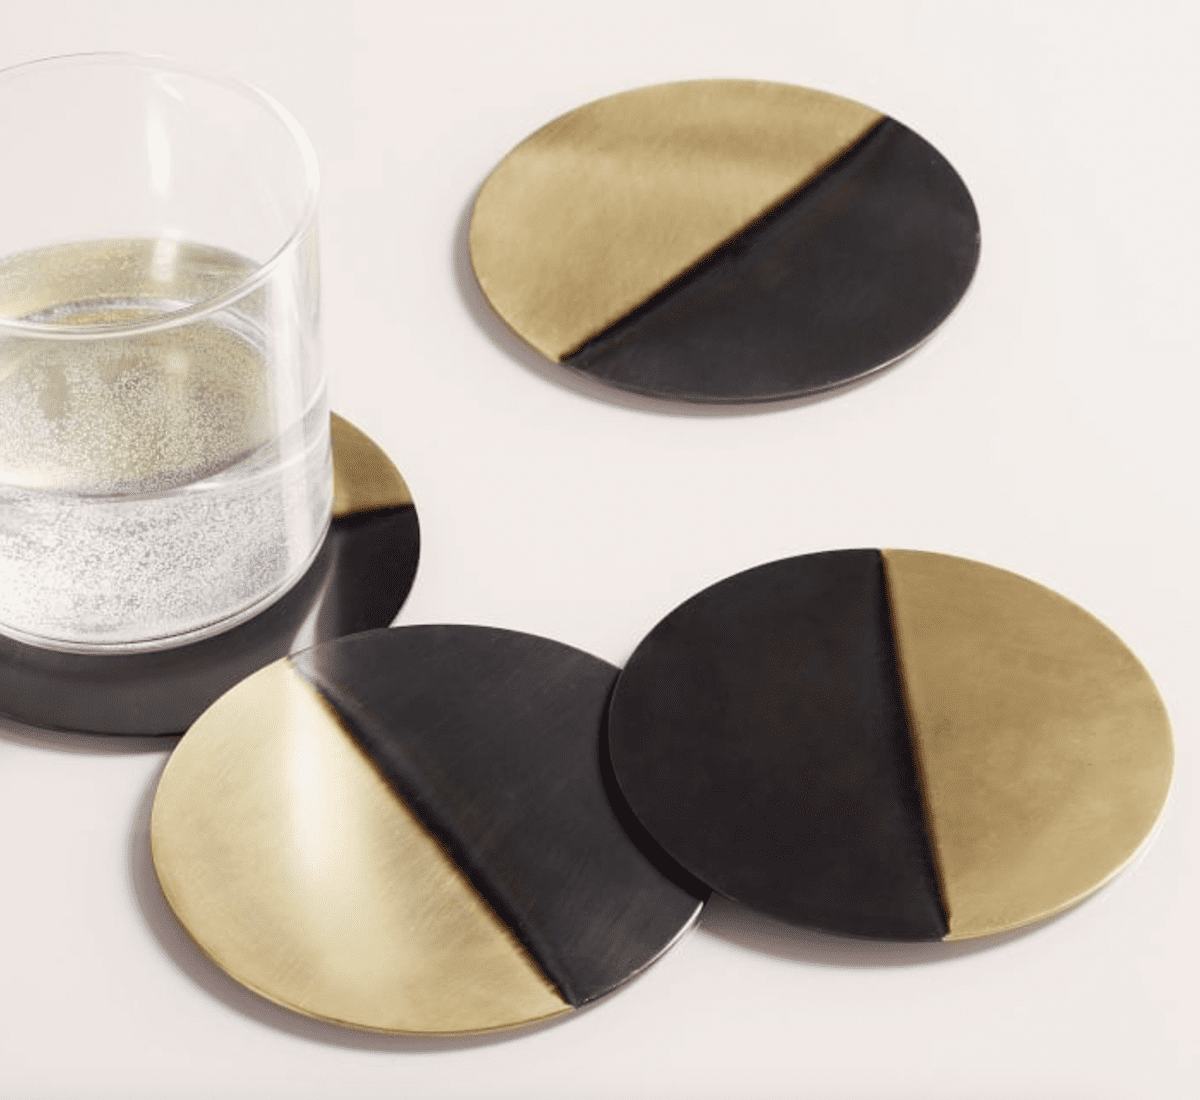 Viski Black Marble Coasters - Round Black Coasters For Drinks - Heavy Stone  With Cork Backing And Stand - Real Black Marble Coasters Set Of 4 : Target